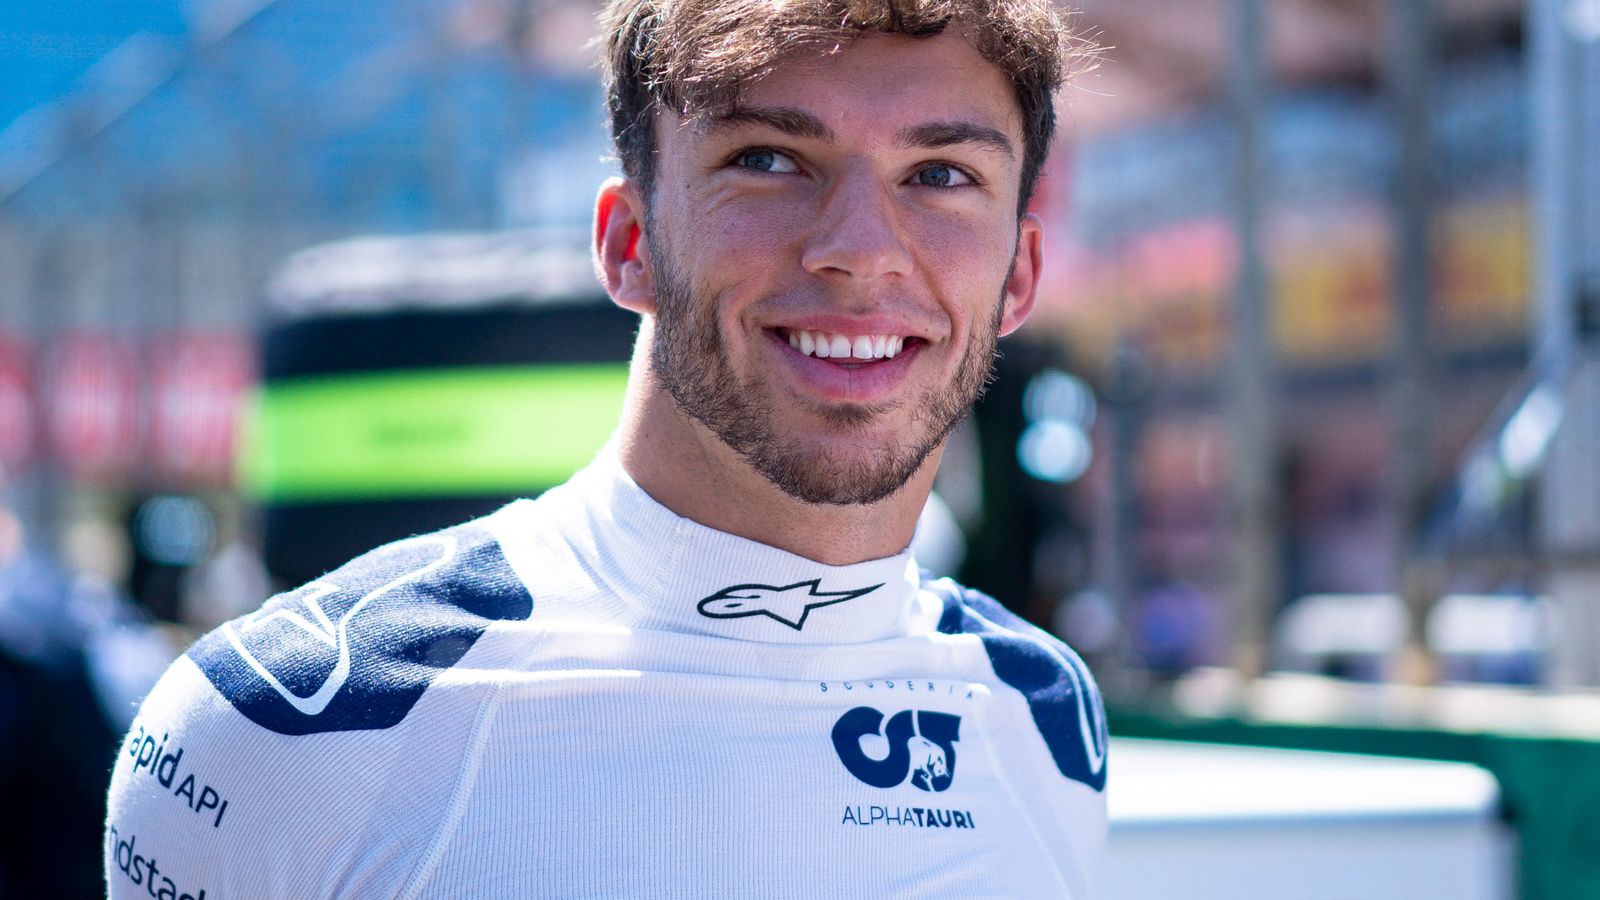 Pierre Gasly staying at AlphaTauri for 2023 Formula 1 season with Red Bull timing ‘not right’